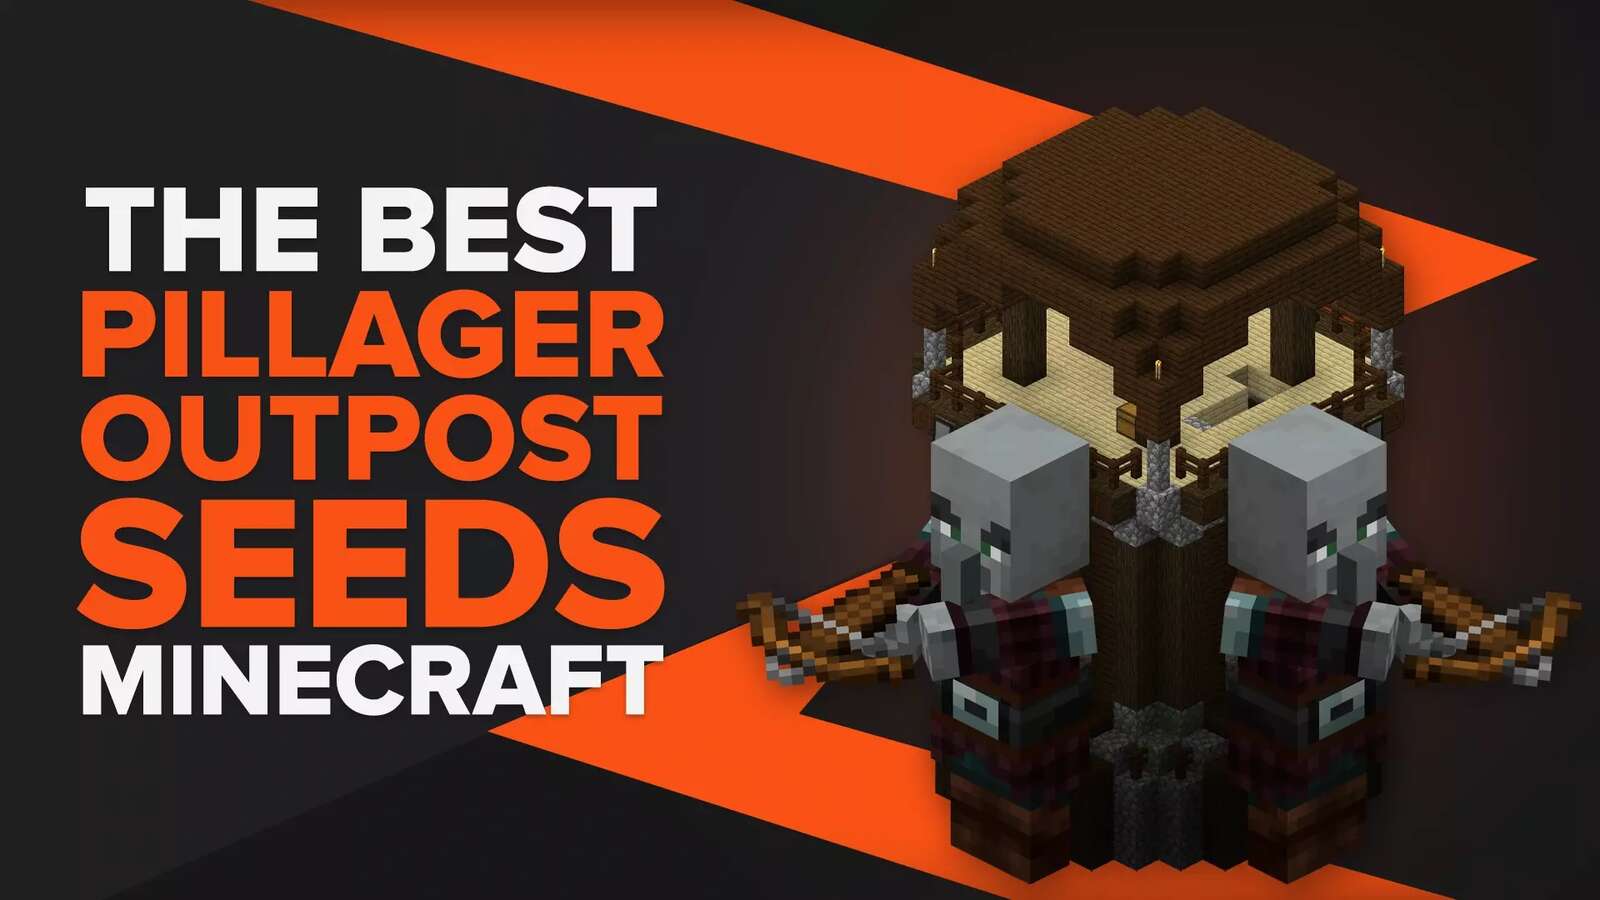 Top 10 Best Pillager Outpost Seeds to Use in Minecraft